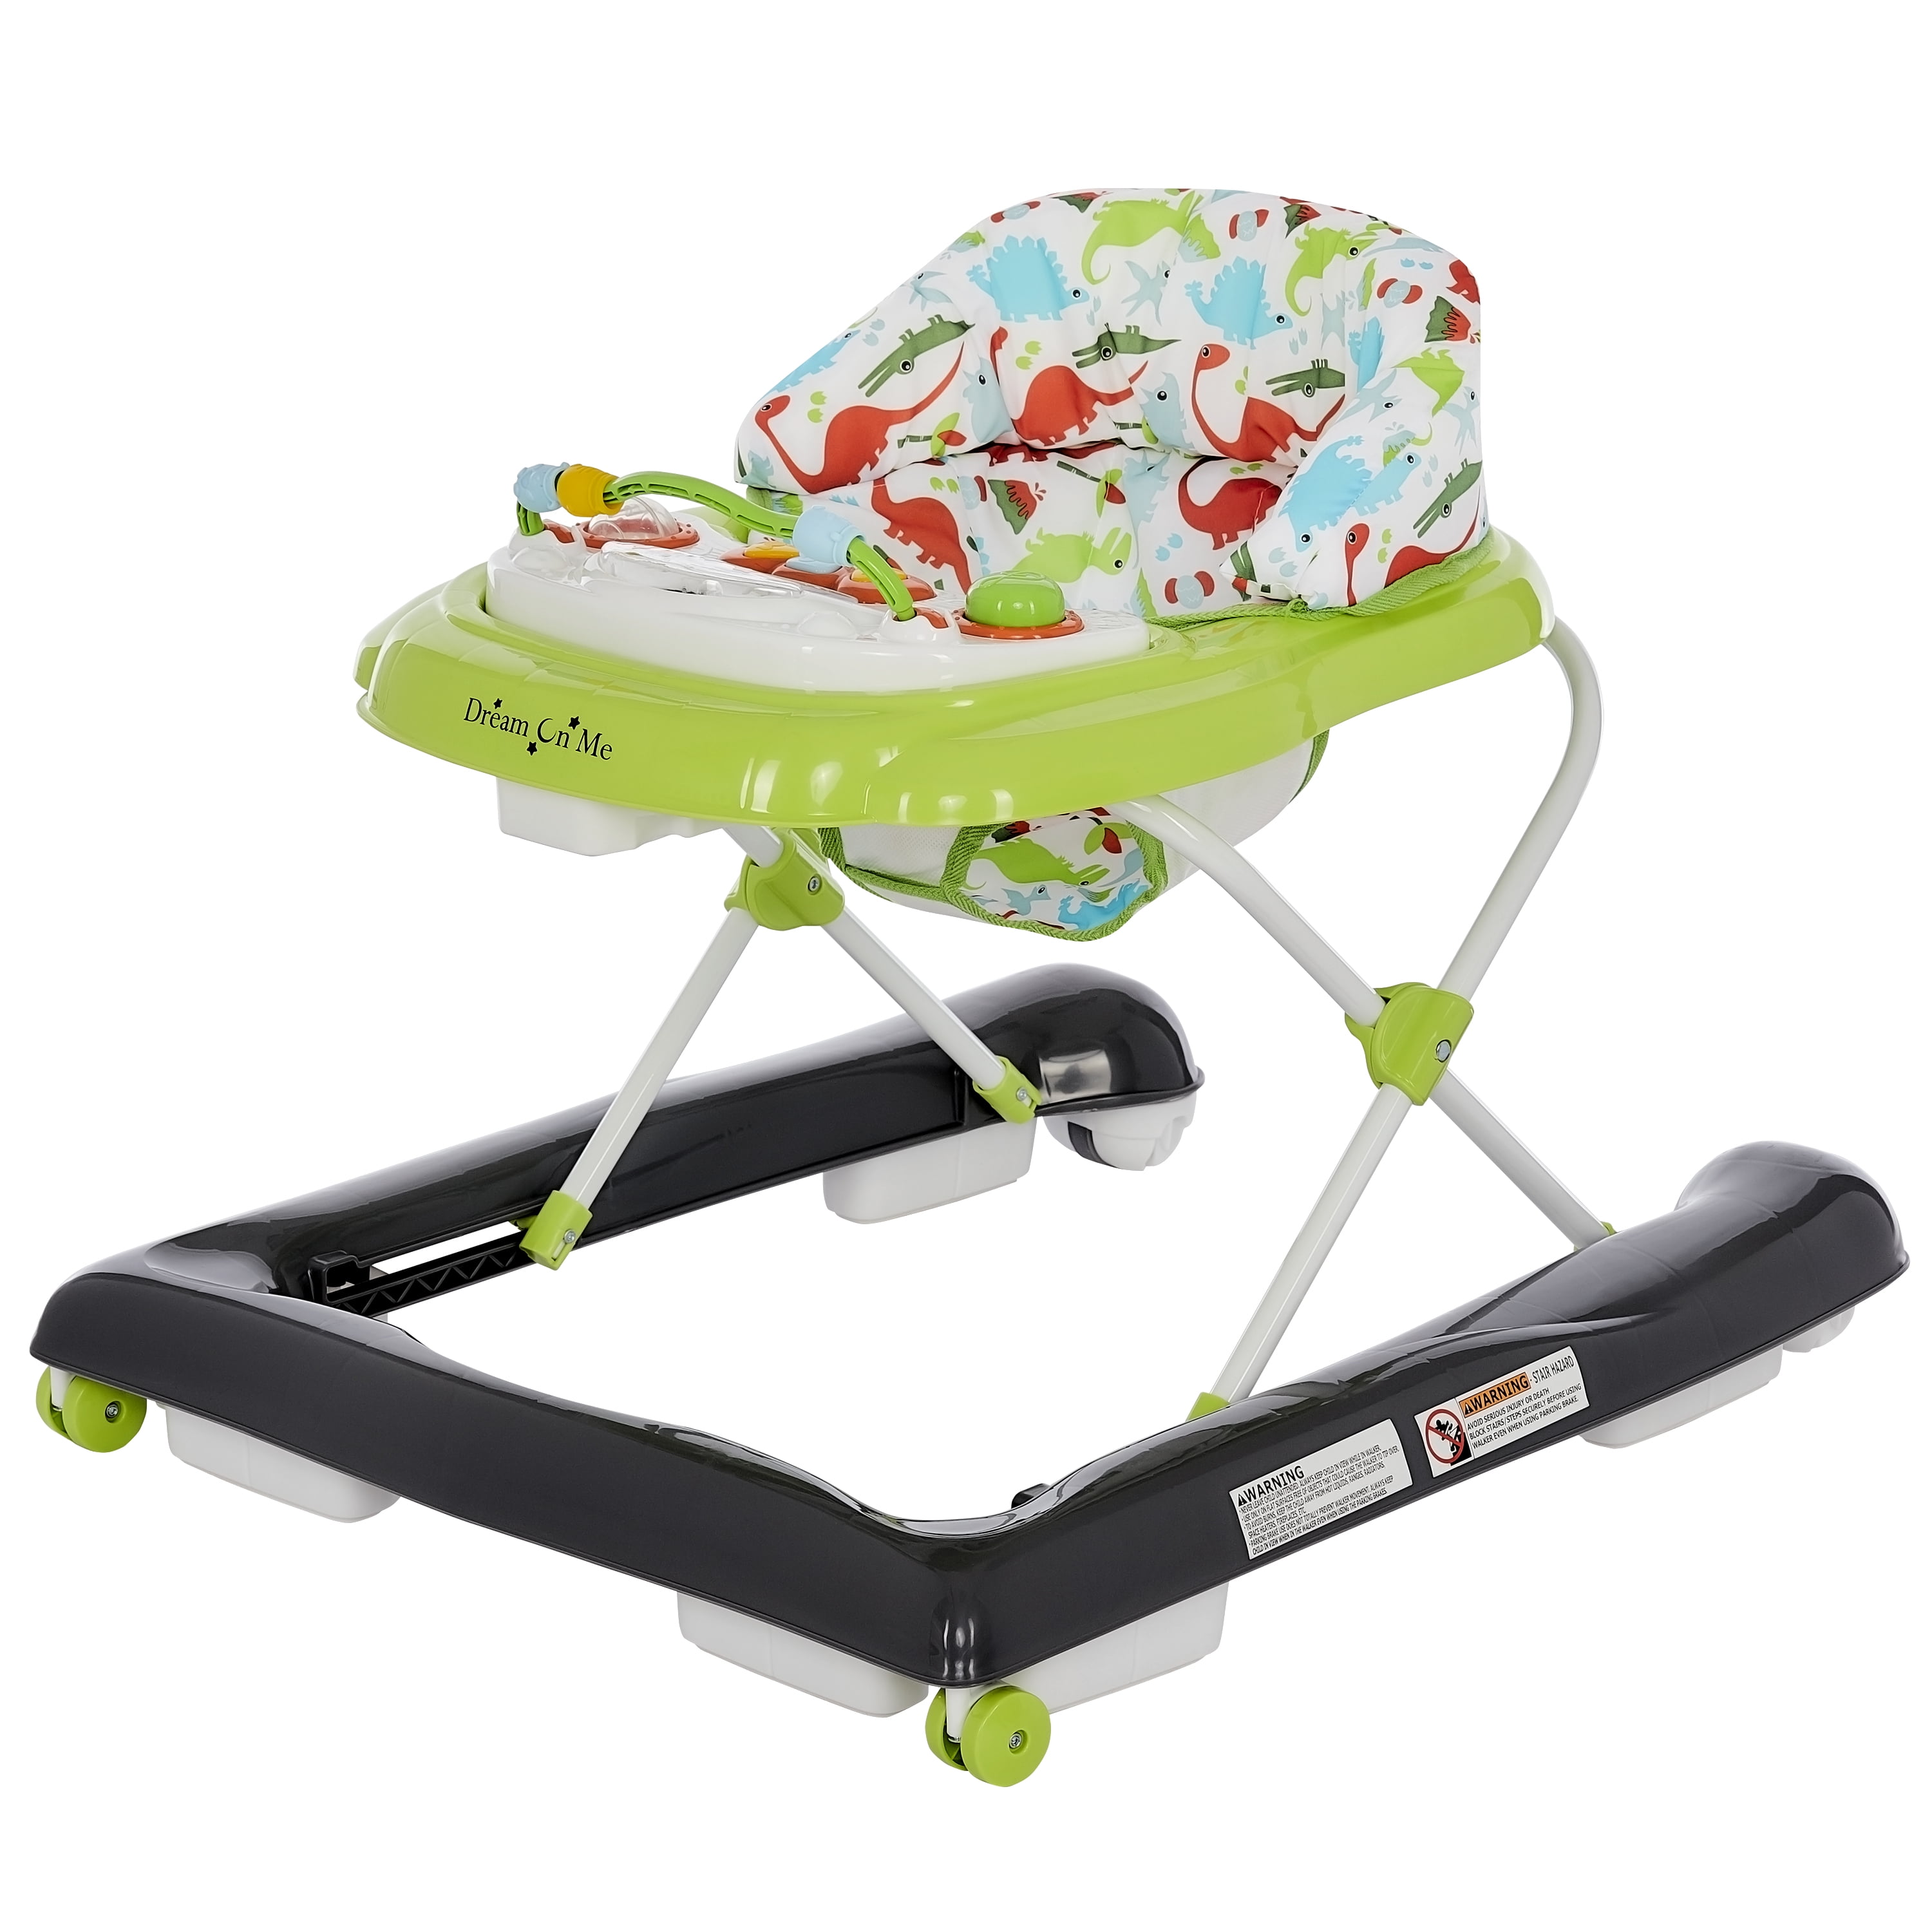 NEW iSafe Baby Boy Girl Activity 2in1 Walker and Rocker Foldable Wheels Play Toy 